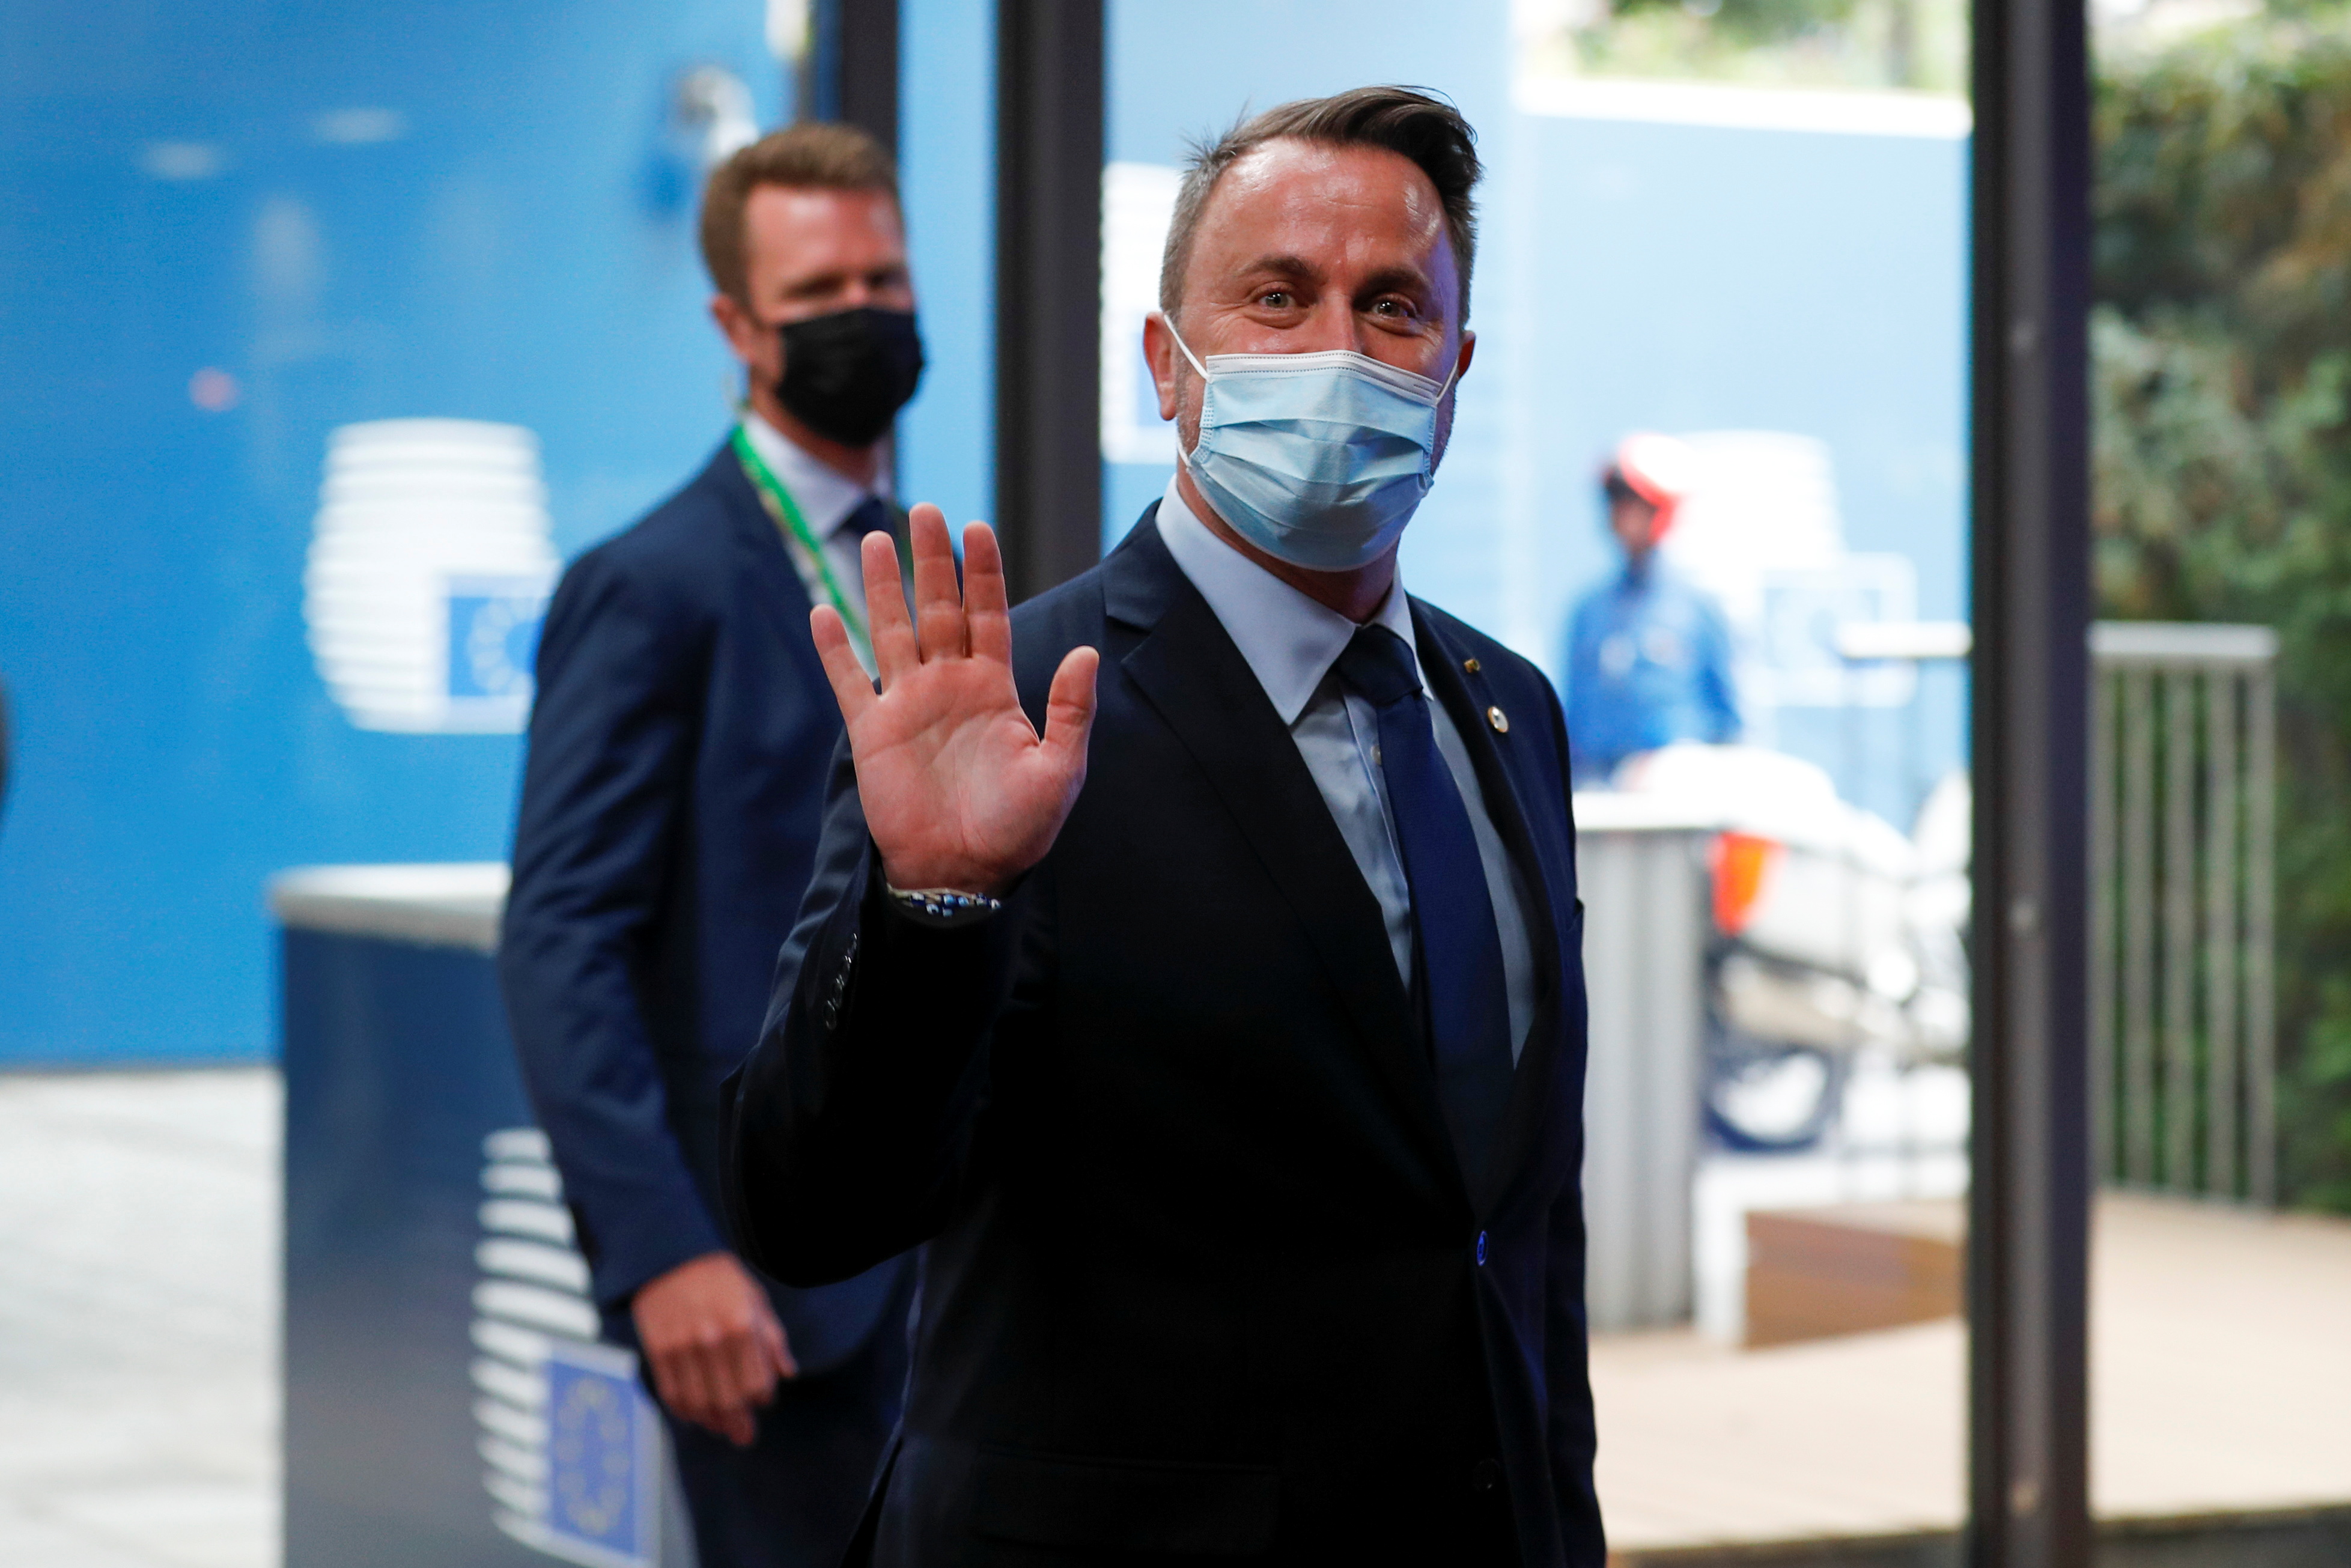 Luxembourg's Prime Minister Xavier Bettel arrives for a European Union leaders meeting in Brussels, Belgium June 24, 2021. REUTERS/Johanna Geron/Pool